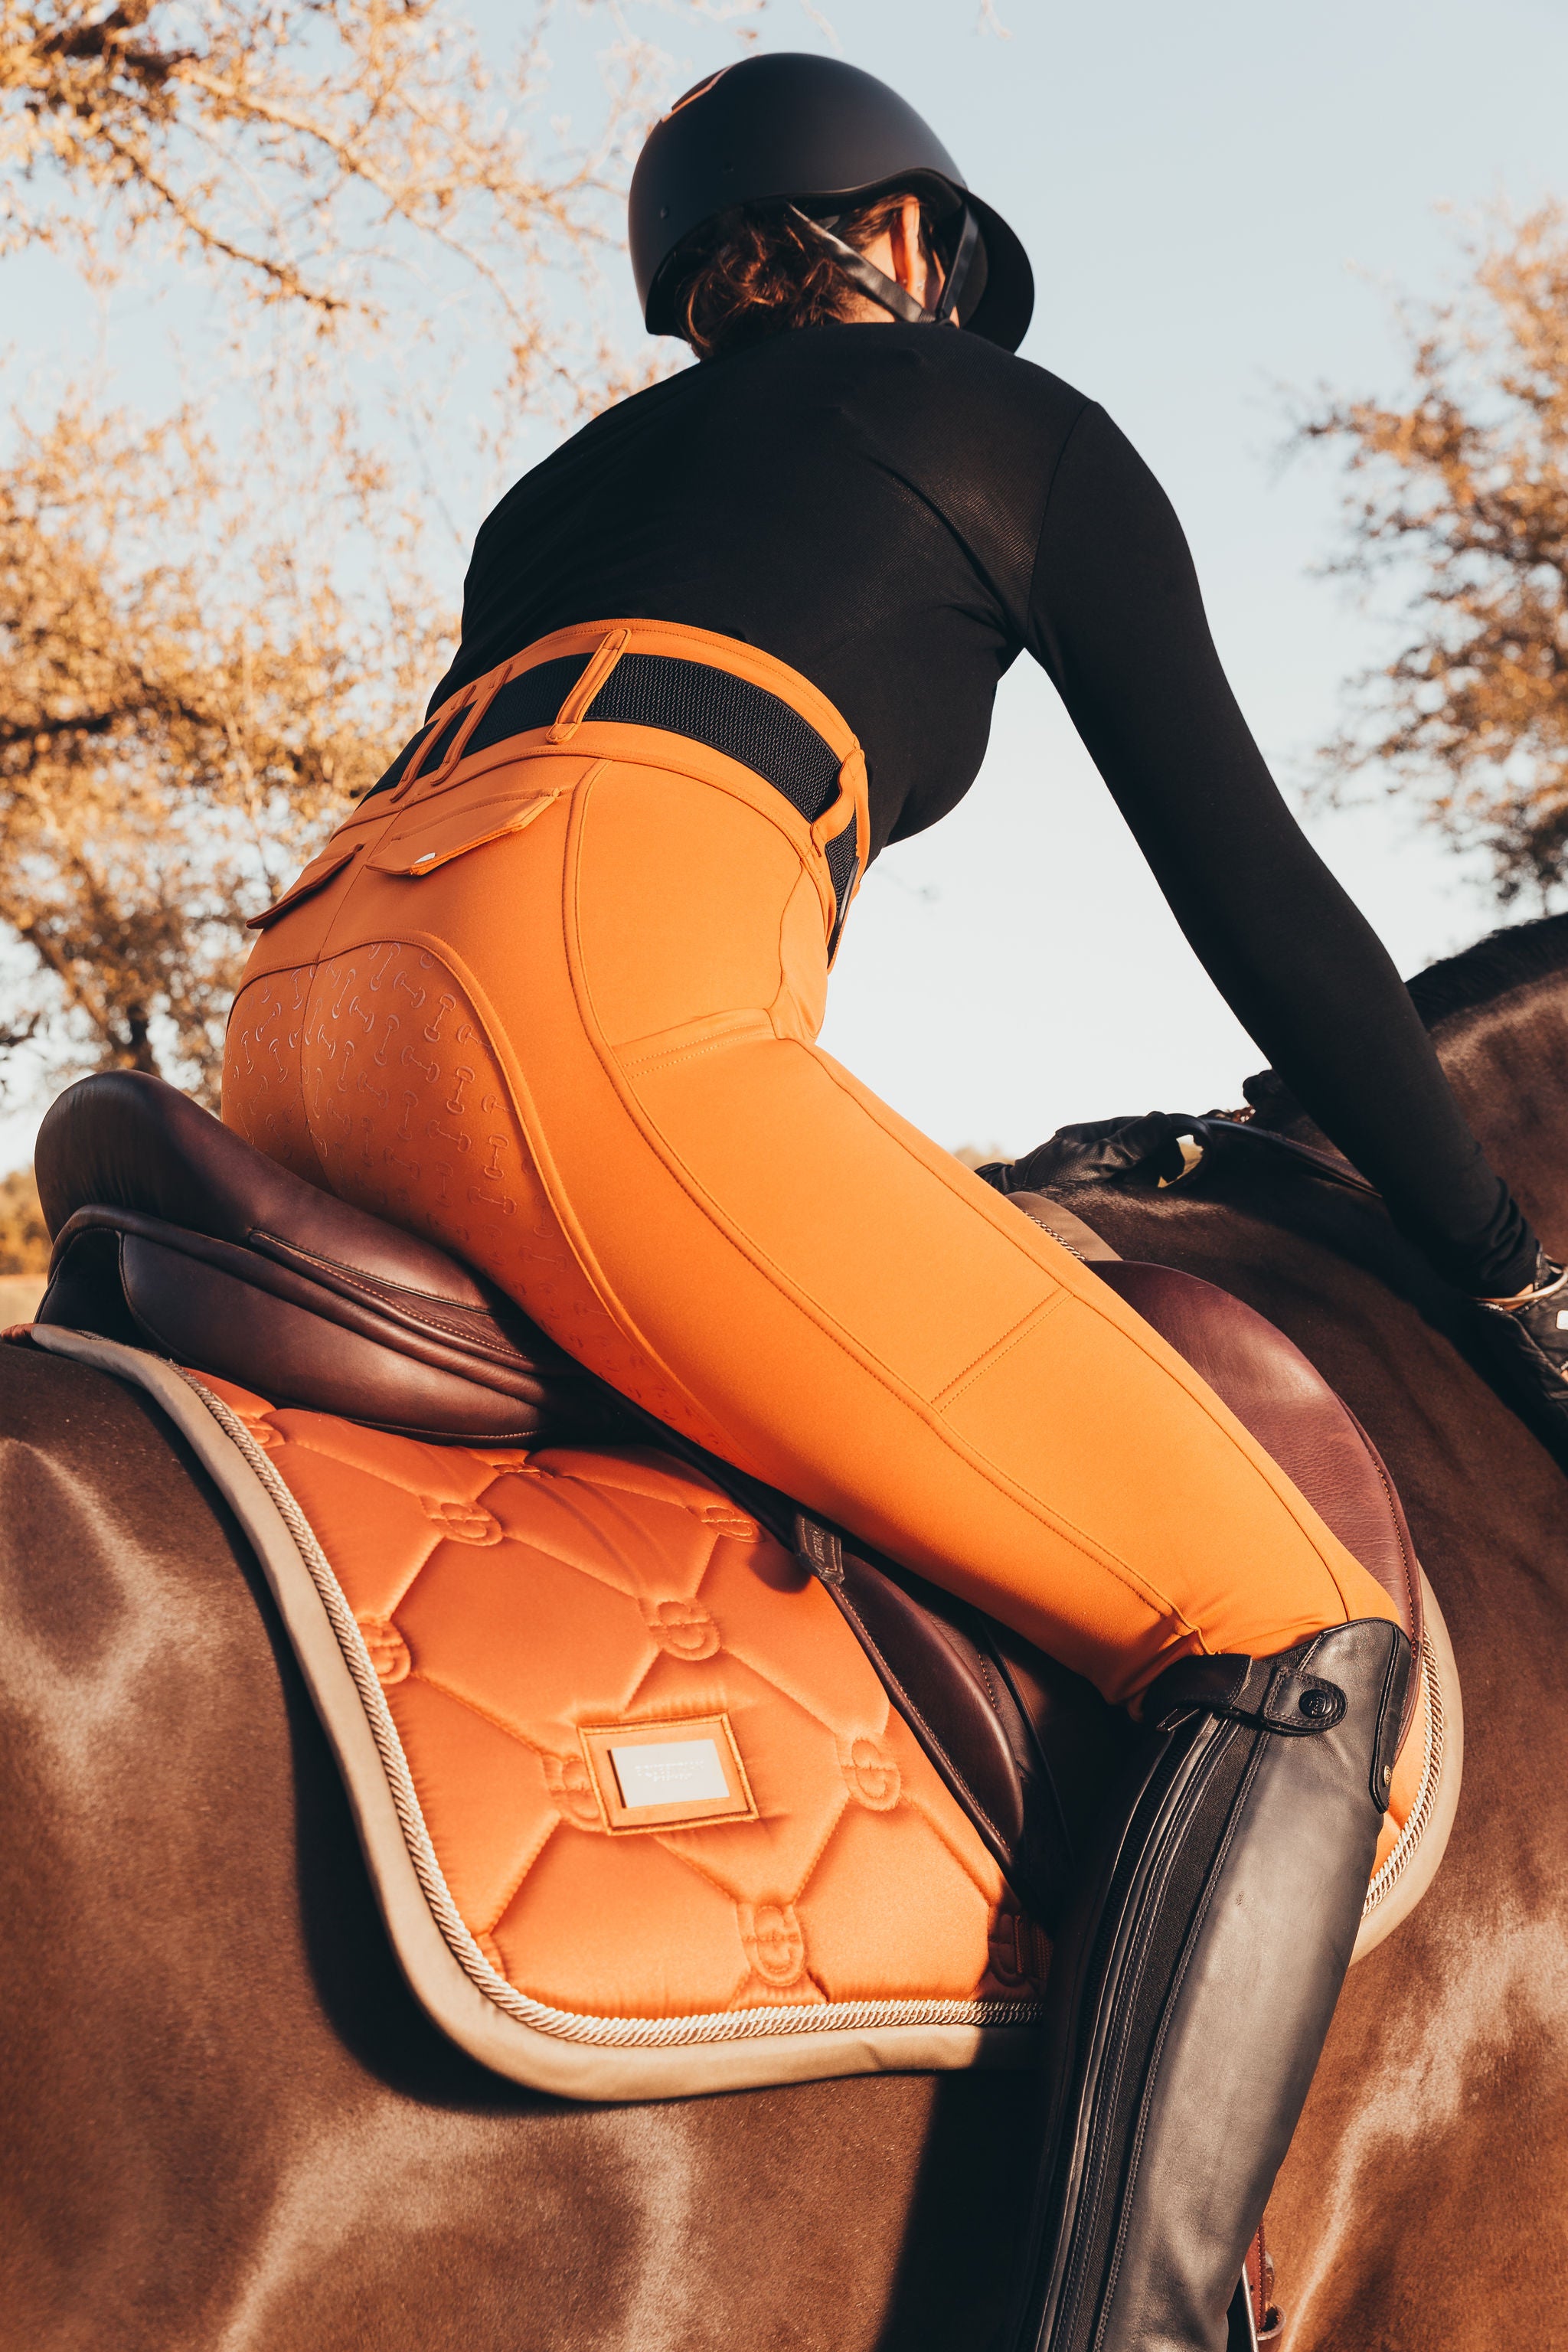 Canter Culture's breeches are comfortable and flexible in the saddle and pairs well with Equestrian Stockholm Bronze Gold.